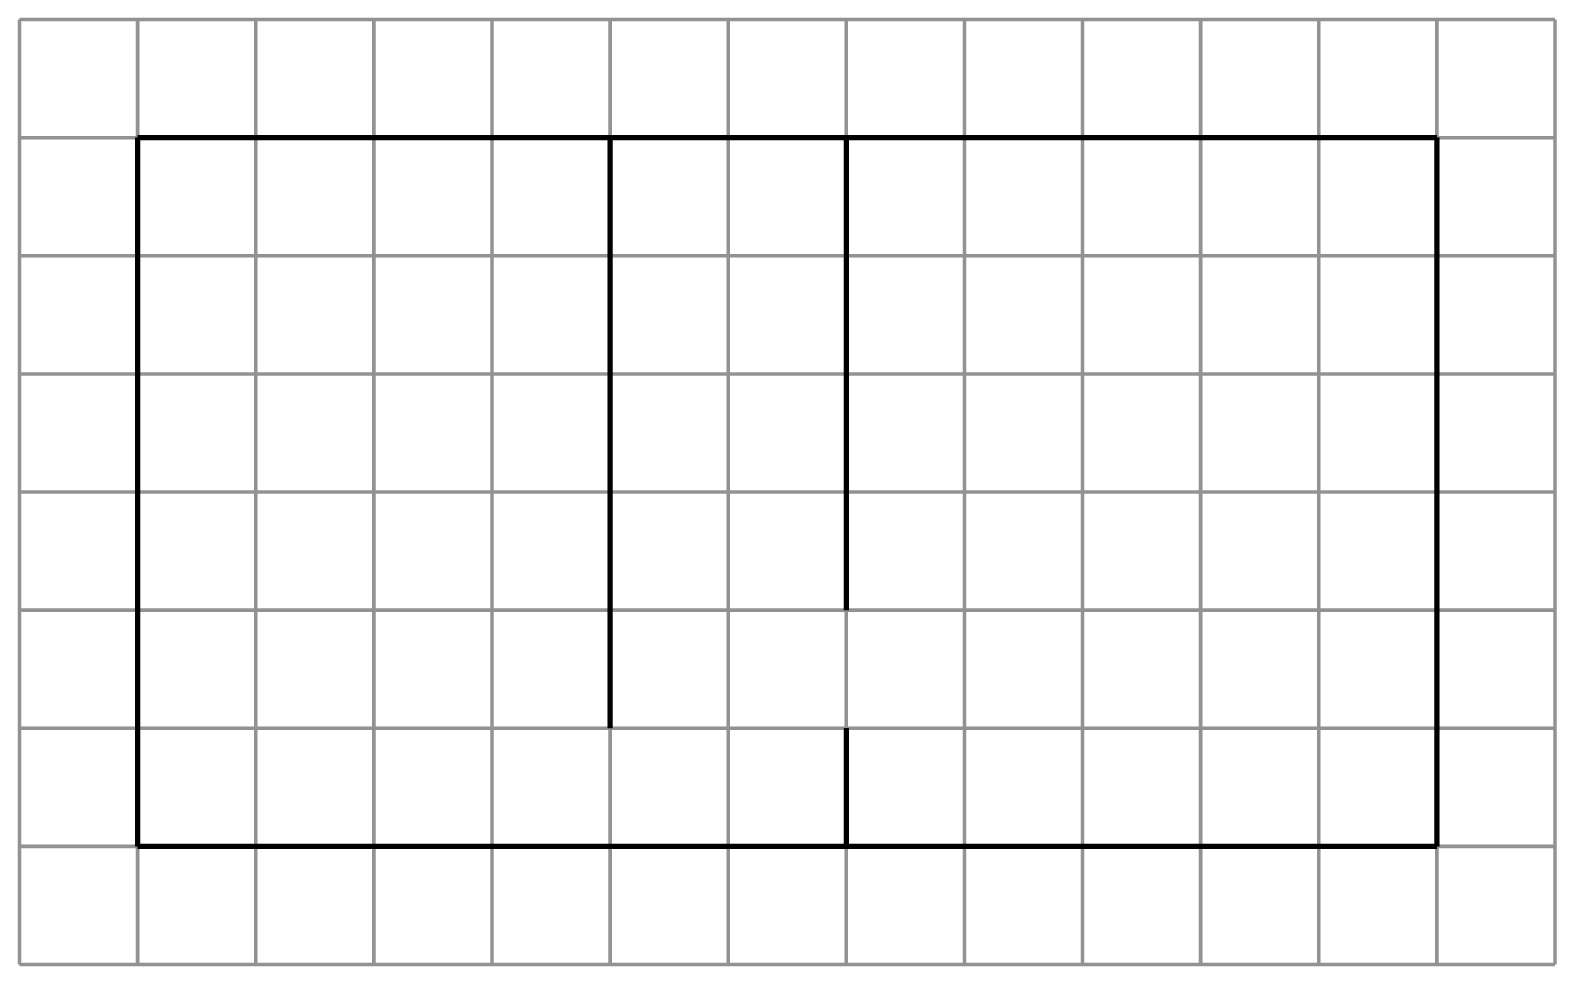 The rectangular grid now shows individually bolded gridlines, indicating that walls do not need to encompass entire grid cells